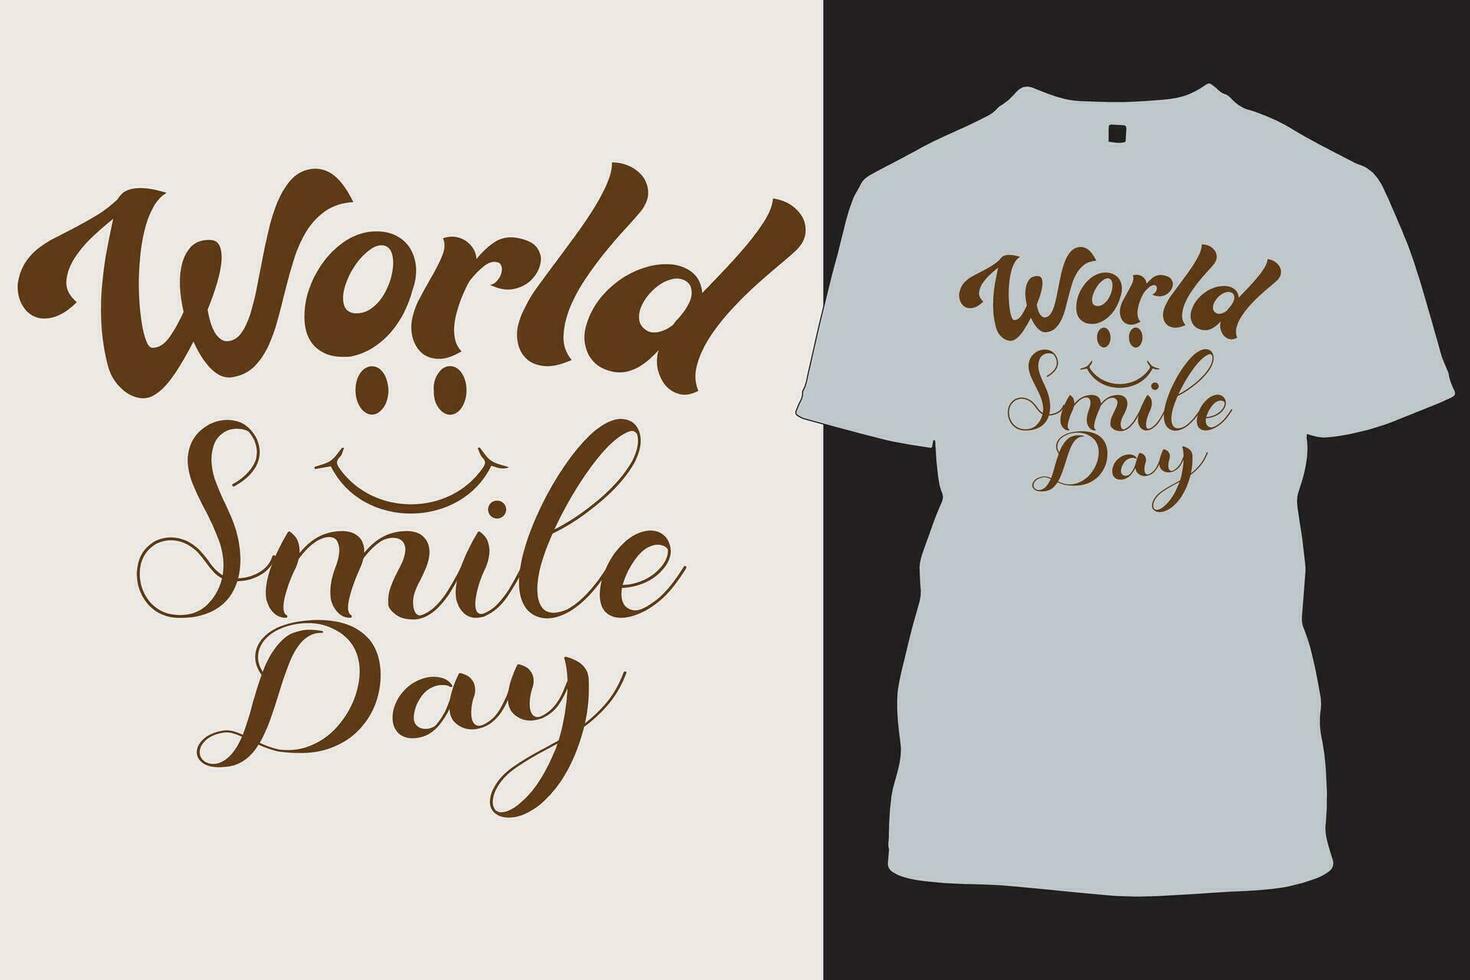 WORLD SMILE DAY T SHIRT , typographic smile t shirt. vector